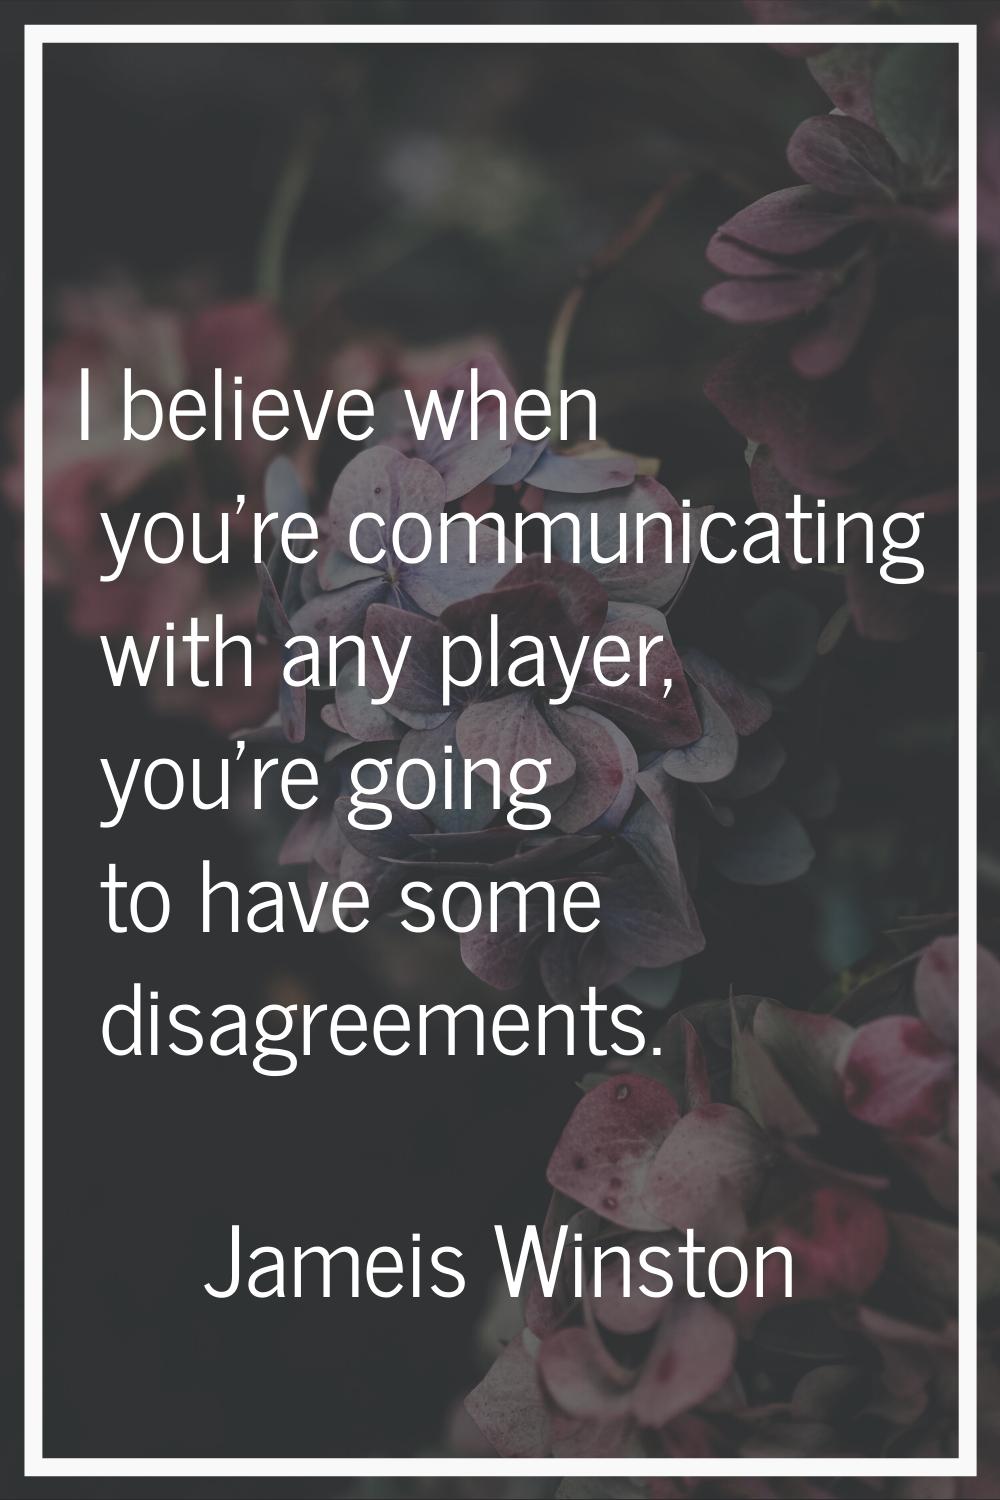 I believe when you're communicating with any player, you're going to have some disagreements.